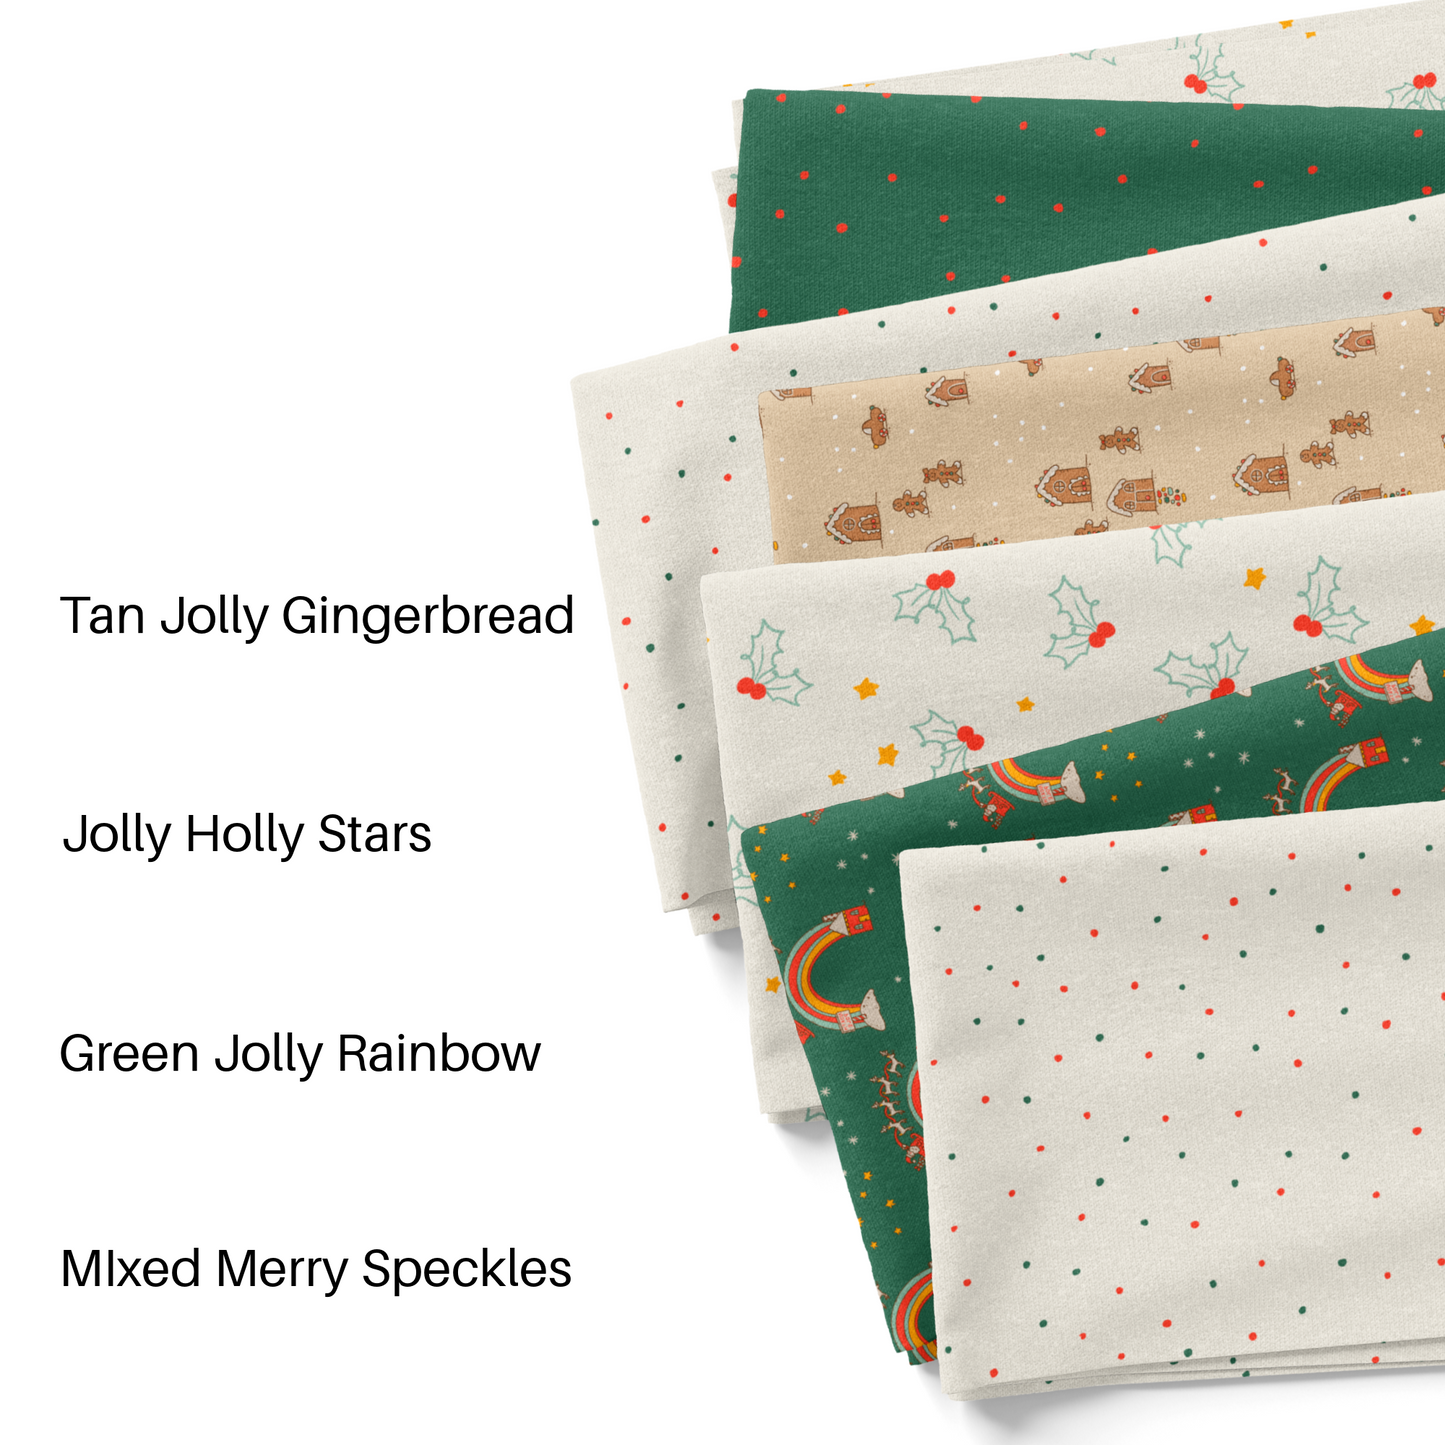 Wild Daisy Gallery's Christmas fabric by the yard swatches.